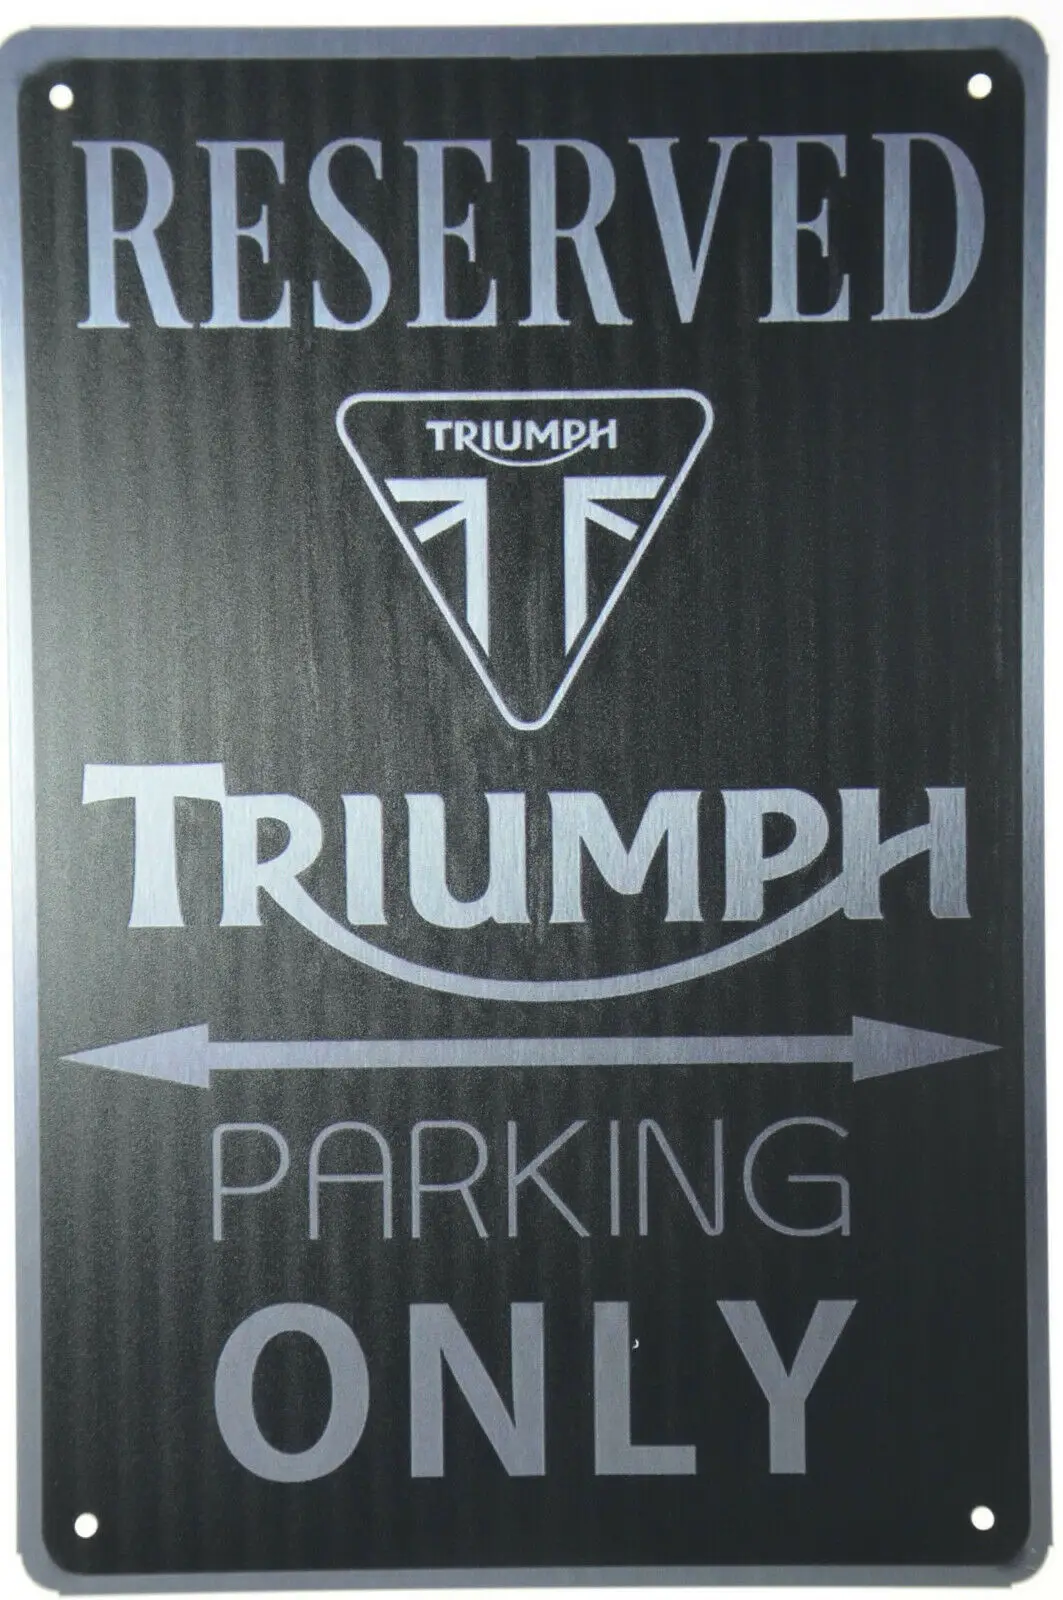 

Triumph Motorcycle Garage Reserved Parking Only metal tin sign Pub Bar Decoration Tin Sign wall art Shabby Chic Decor Plaque